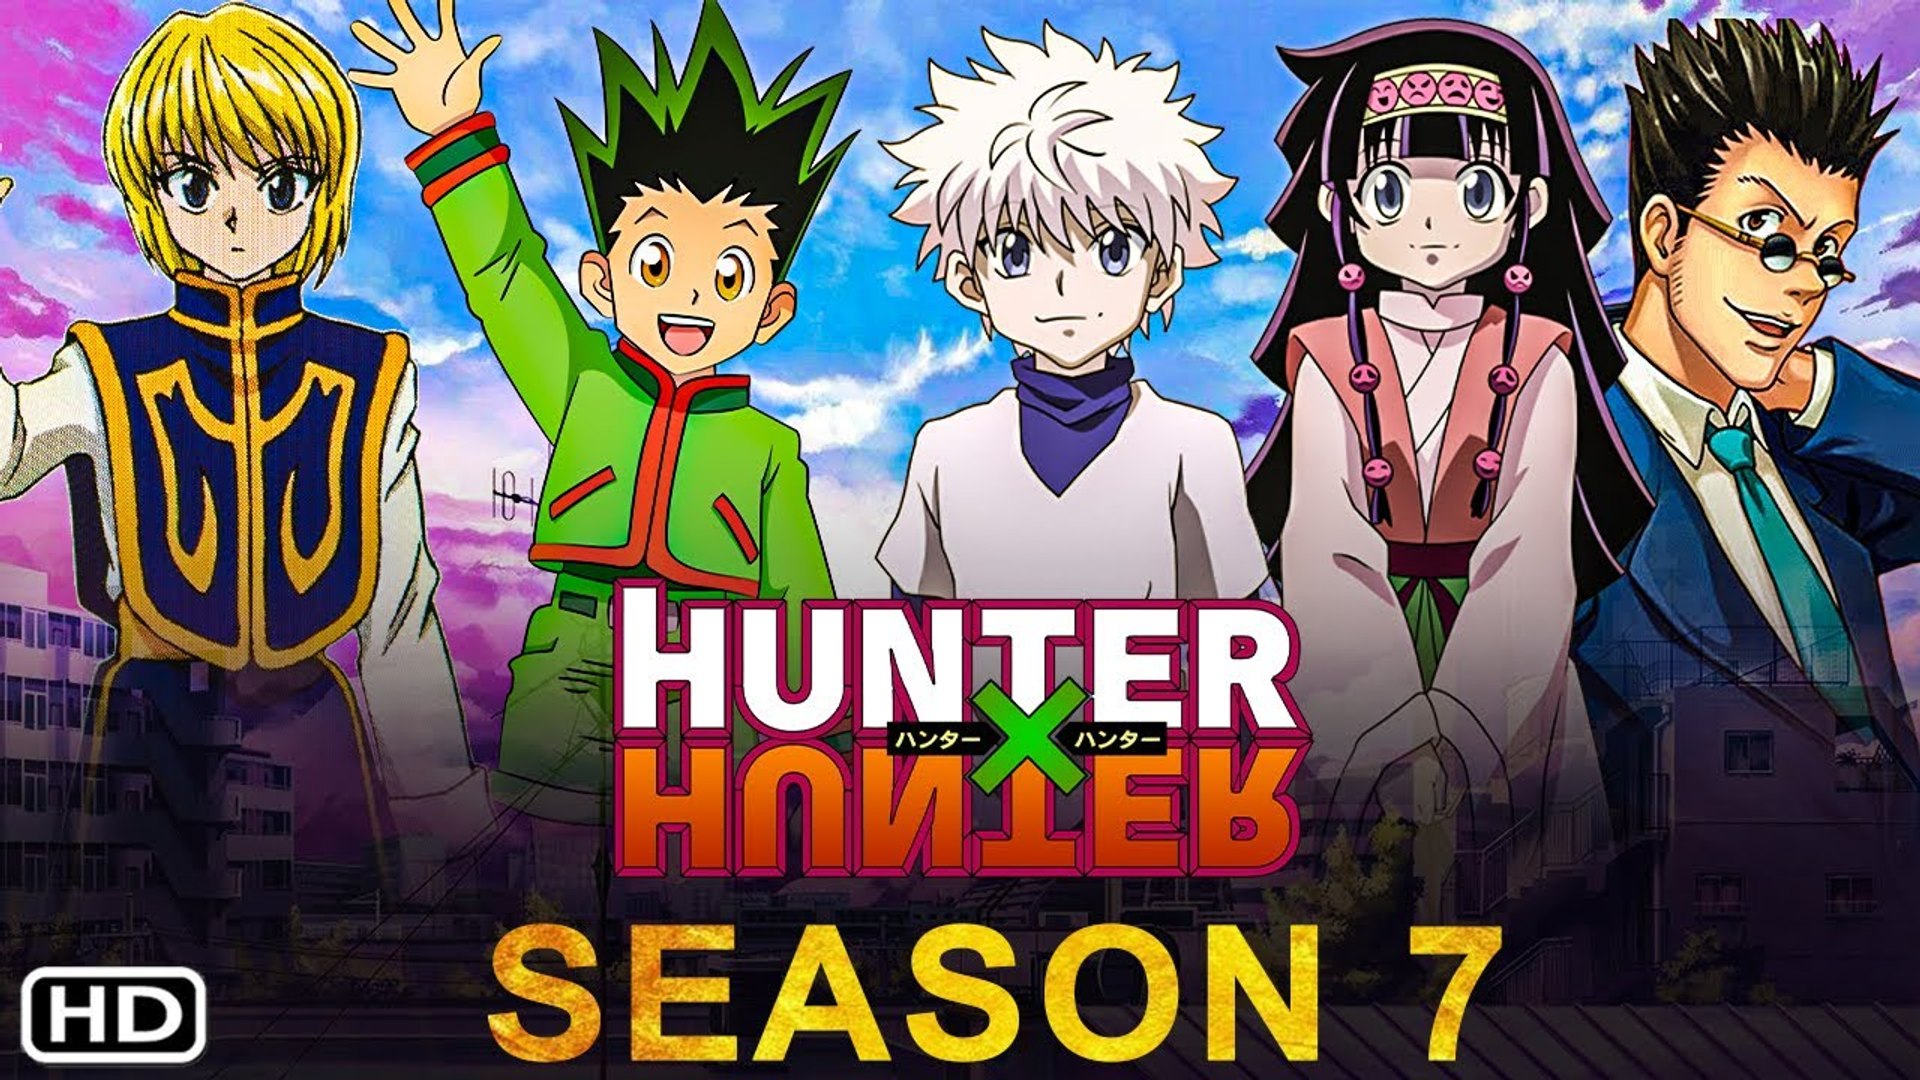 How many seasons of Hunter x Hunter are there?